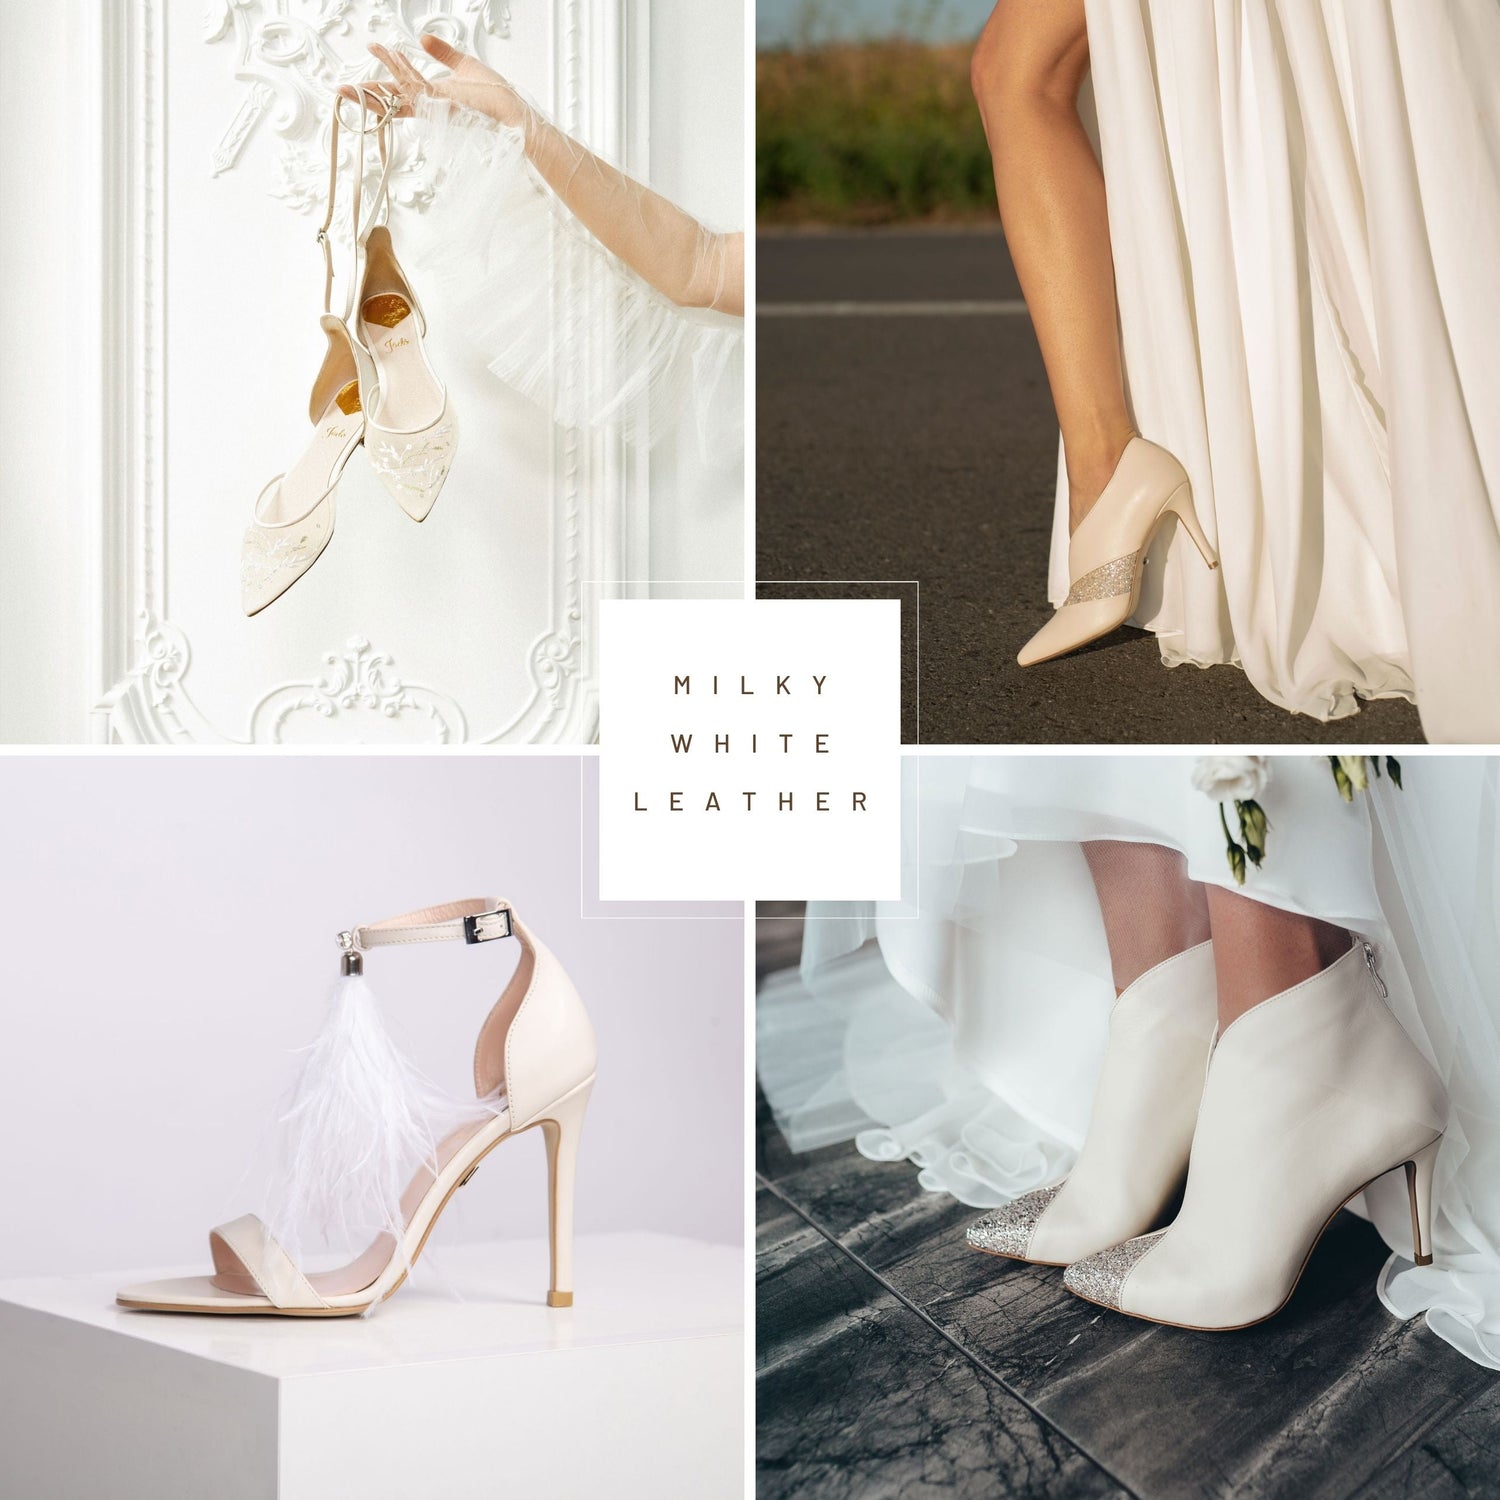 country-08-wedding-shoes